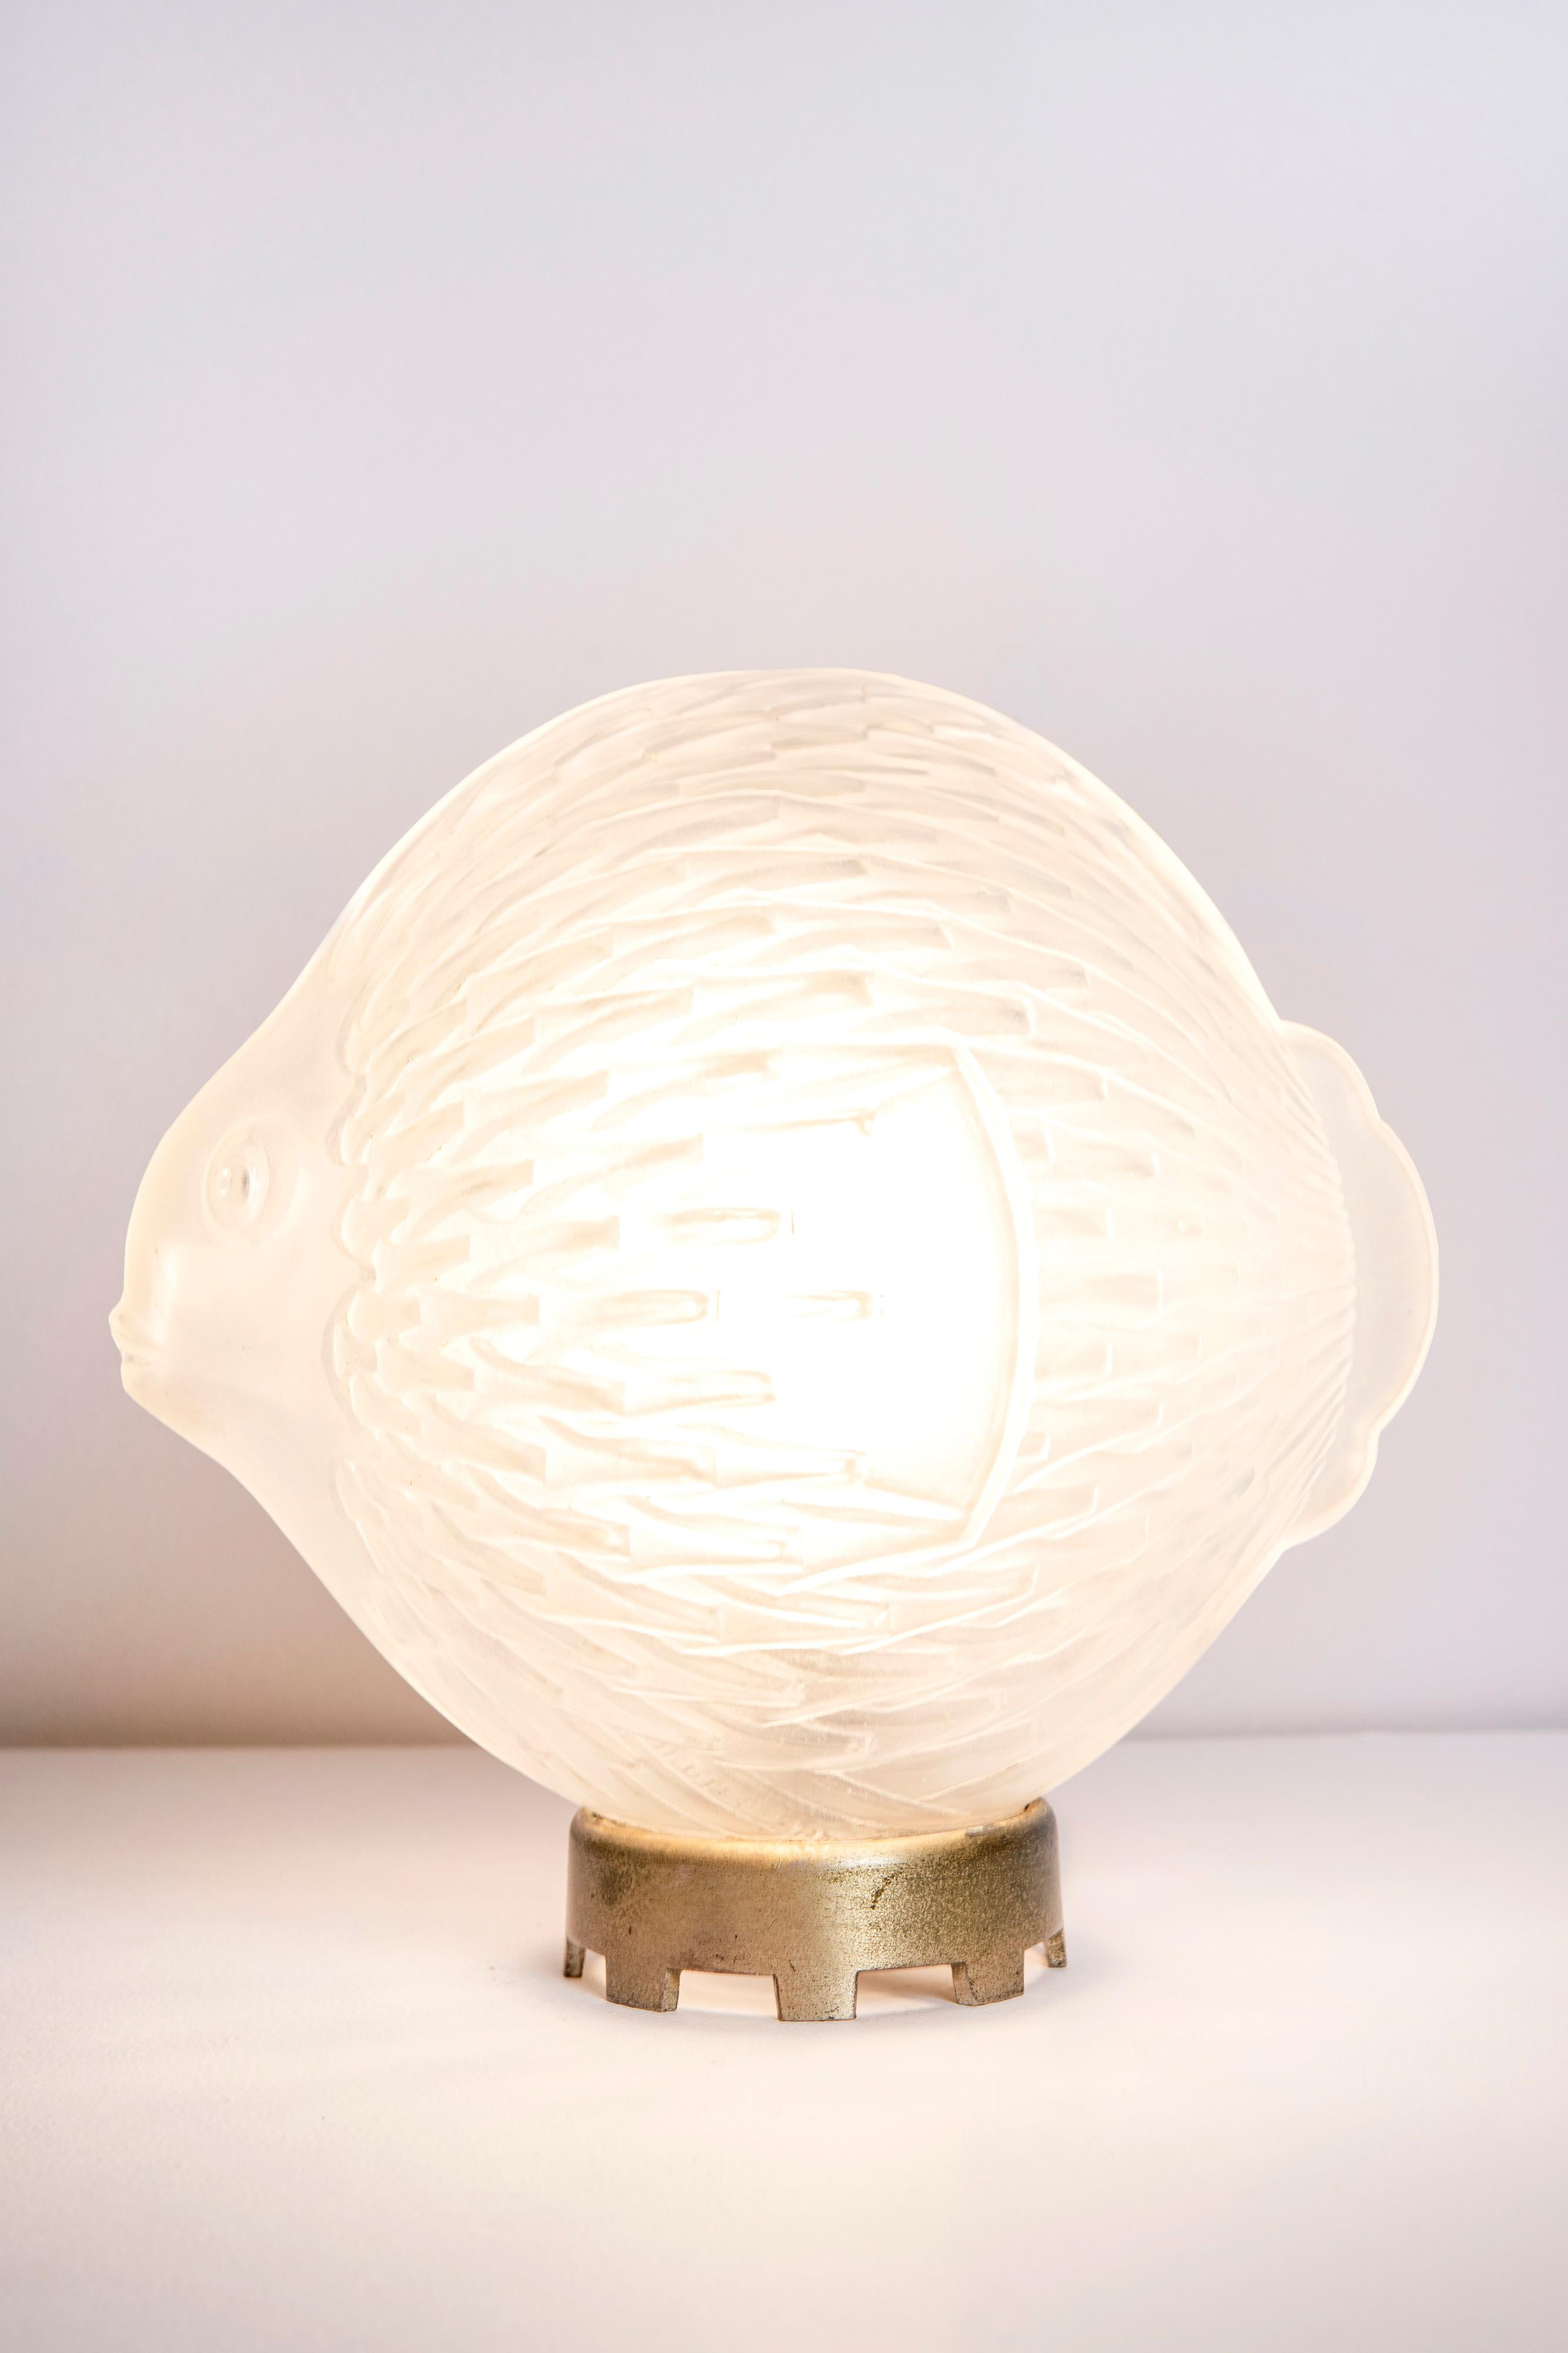 French Glass and Bronze Blowfish Lamp, Art Deco Period, France, circa 1920 For Sale